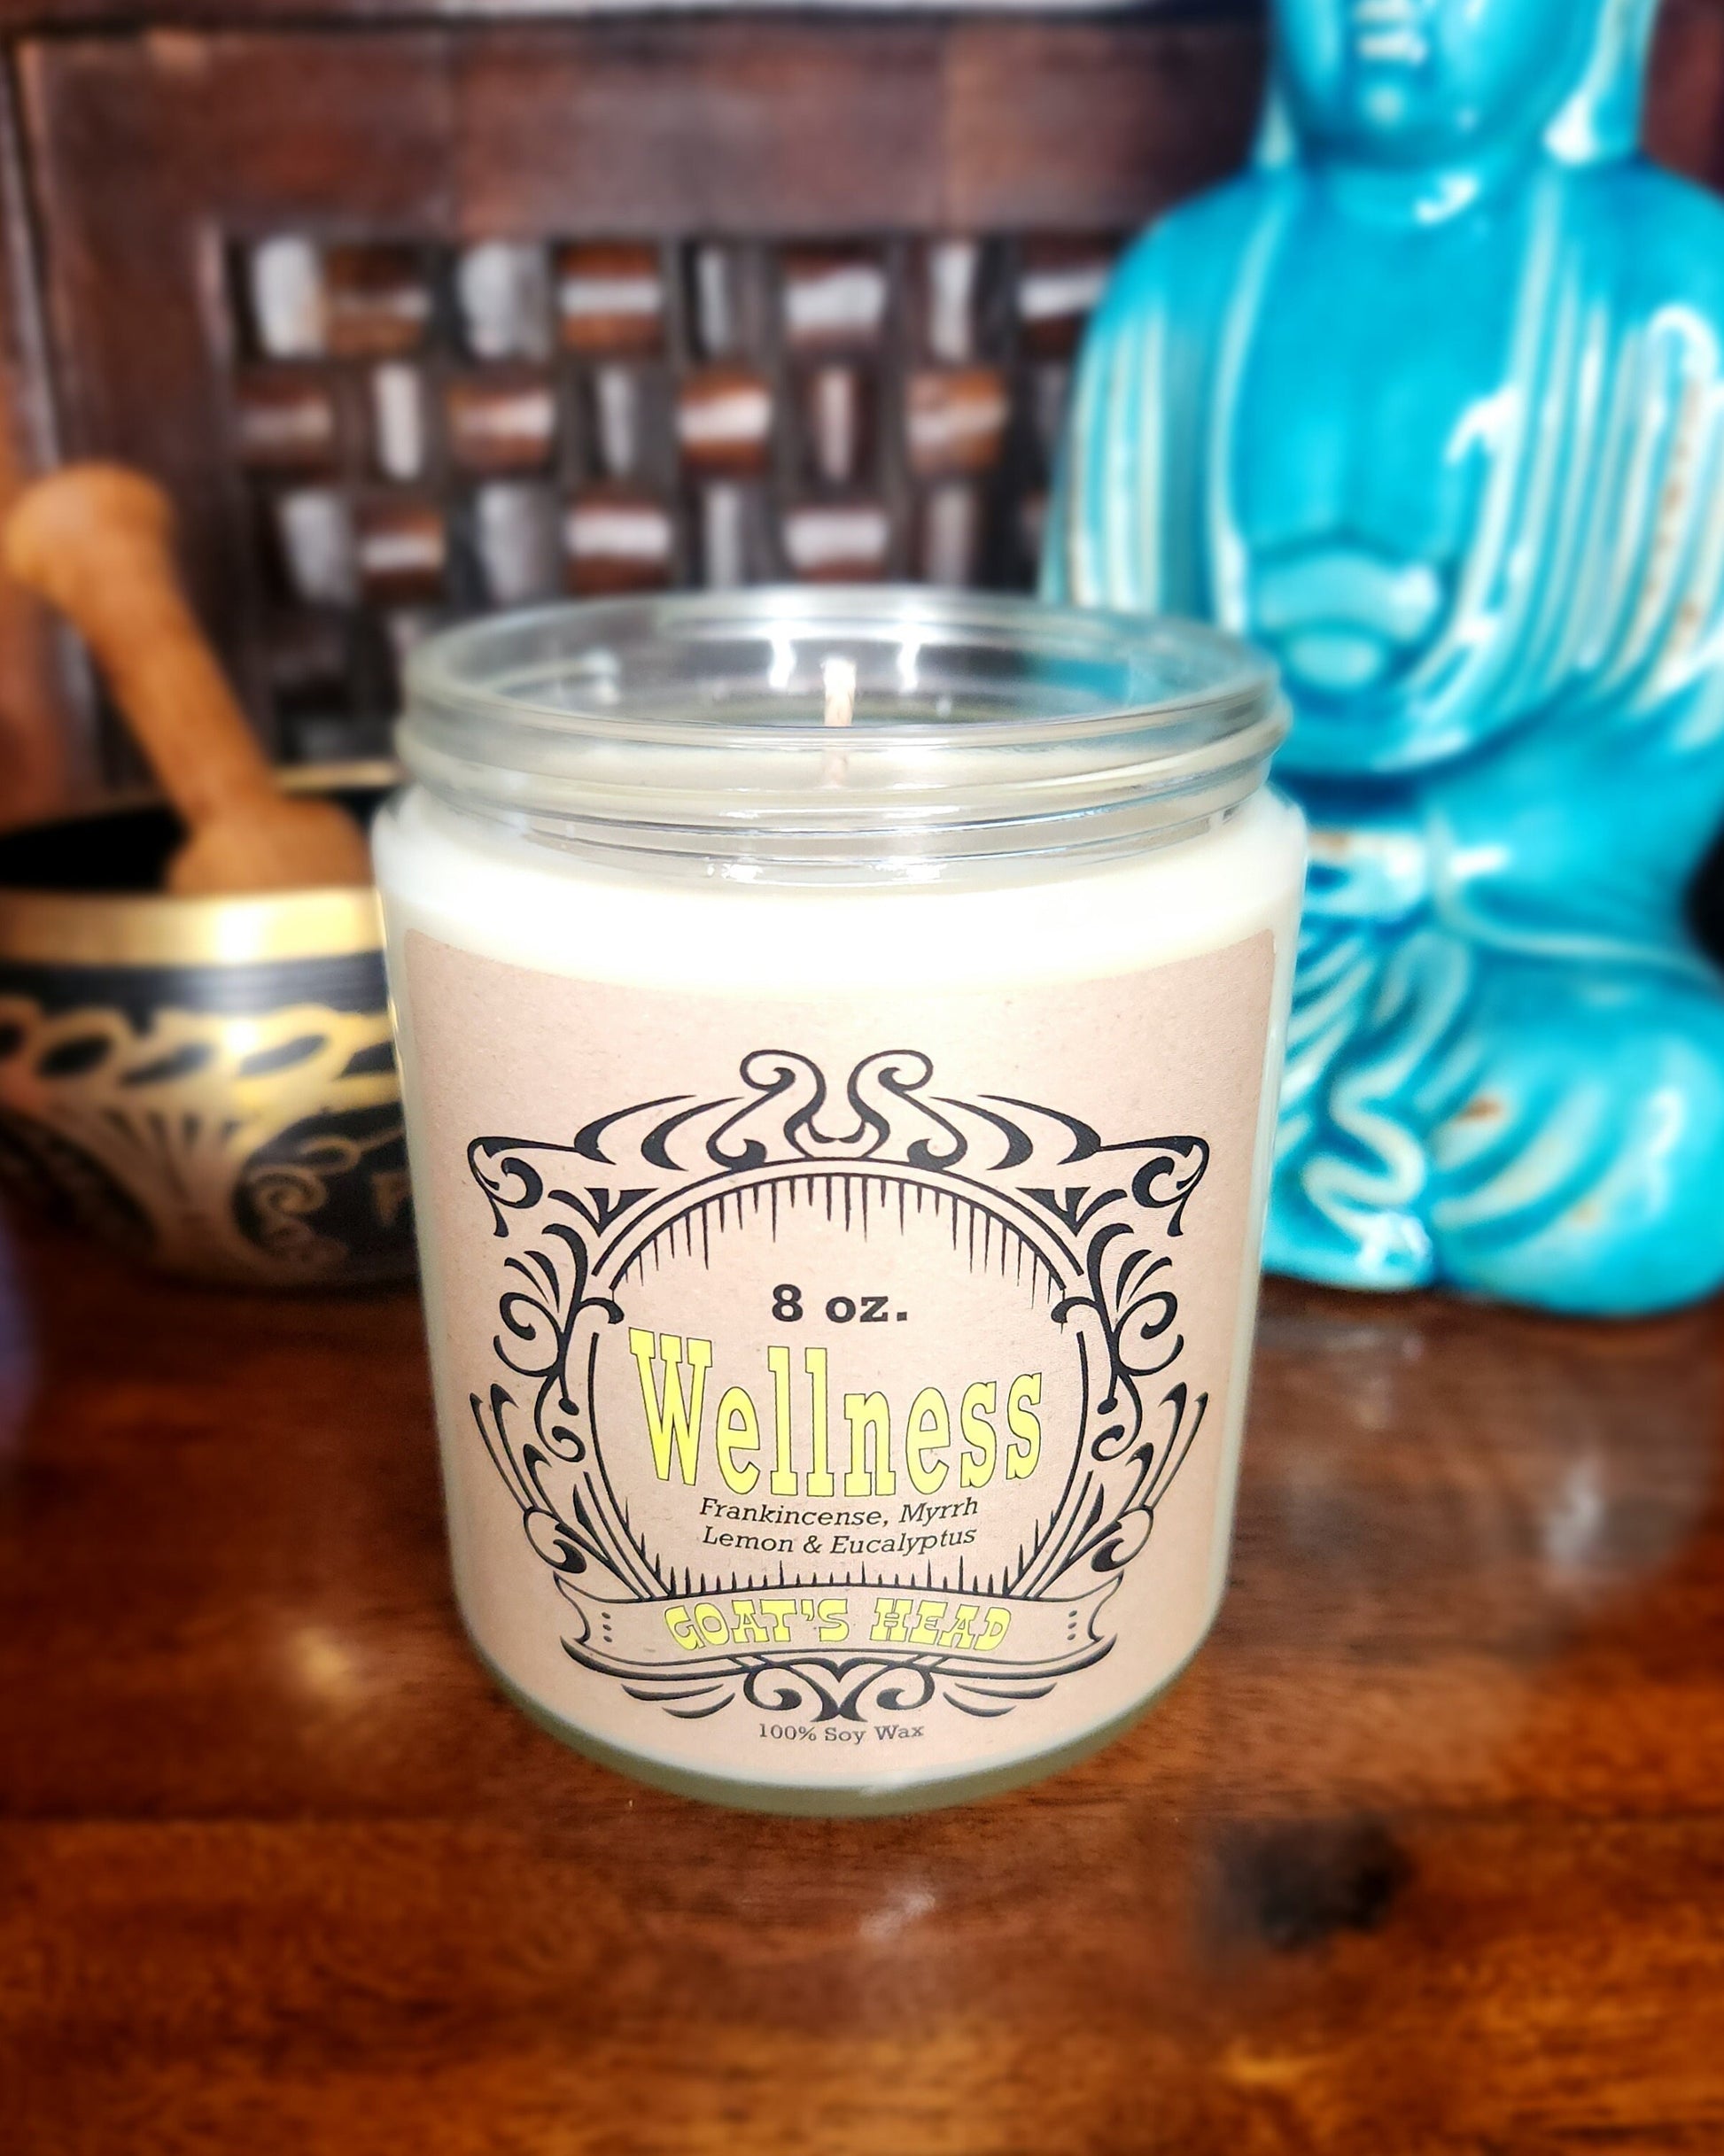 Goat's Head "Wellness" revised  Soy Candle 8 oz. glass jar